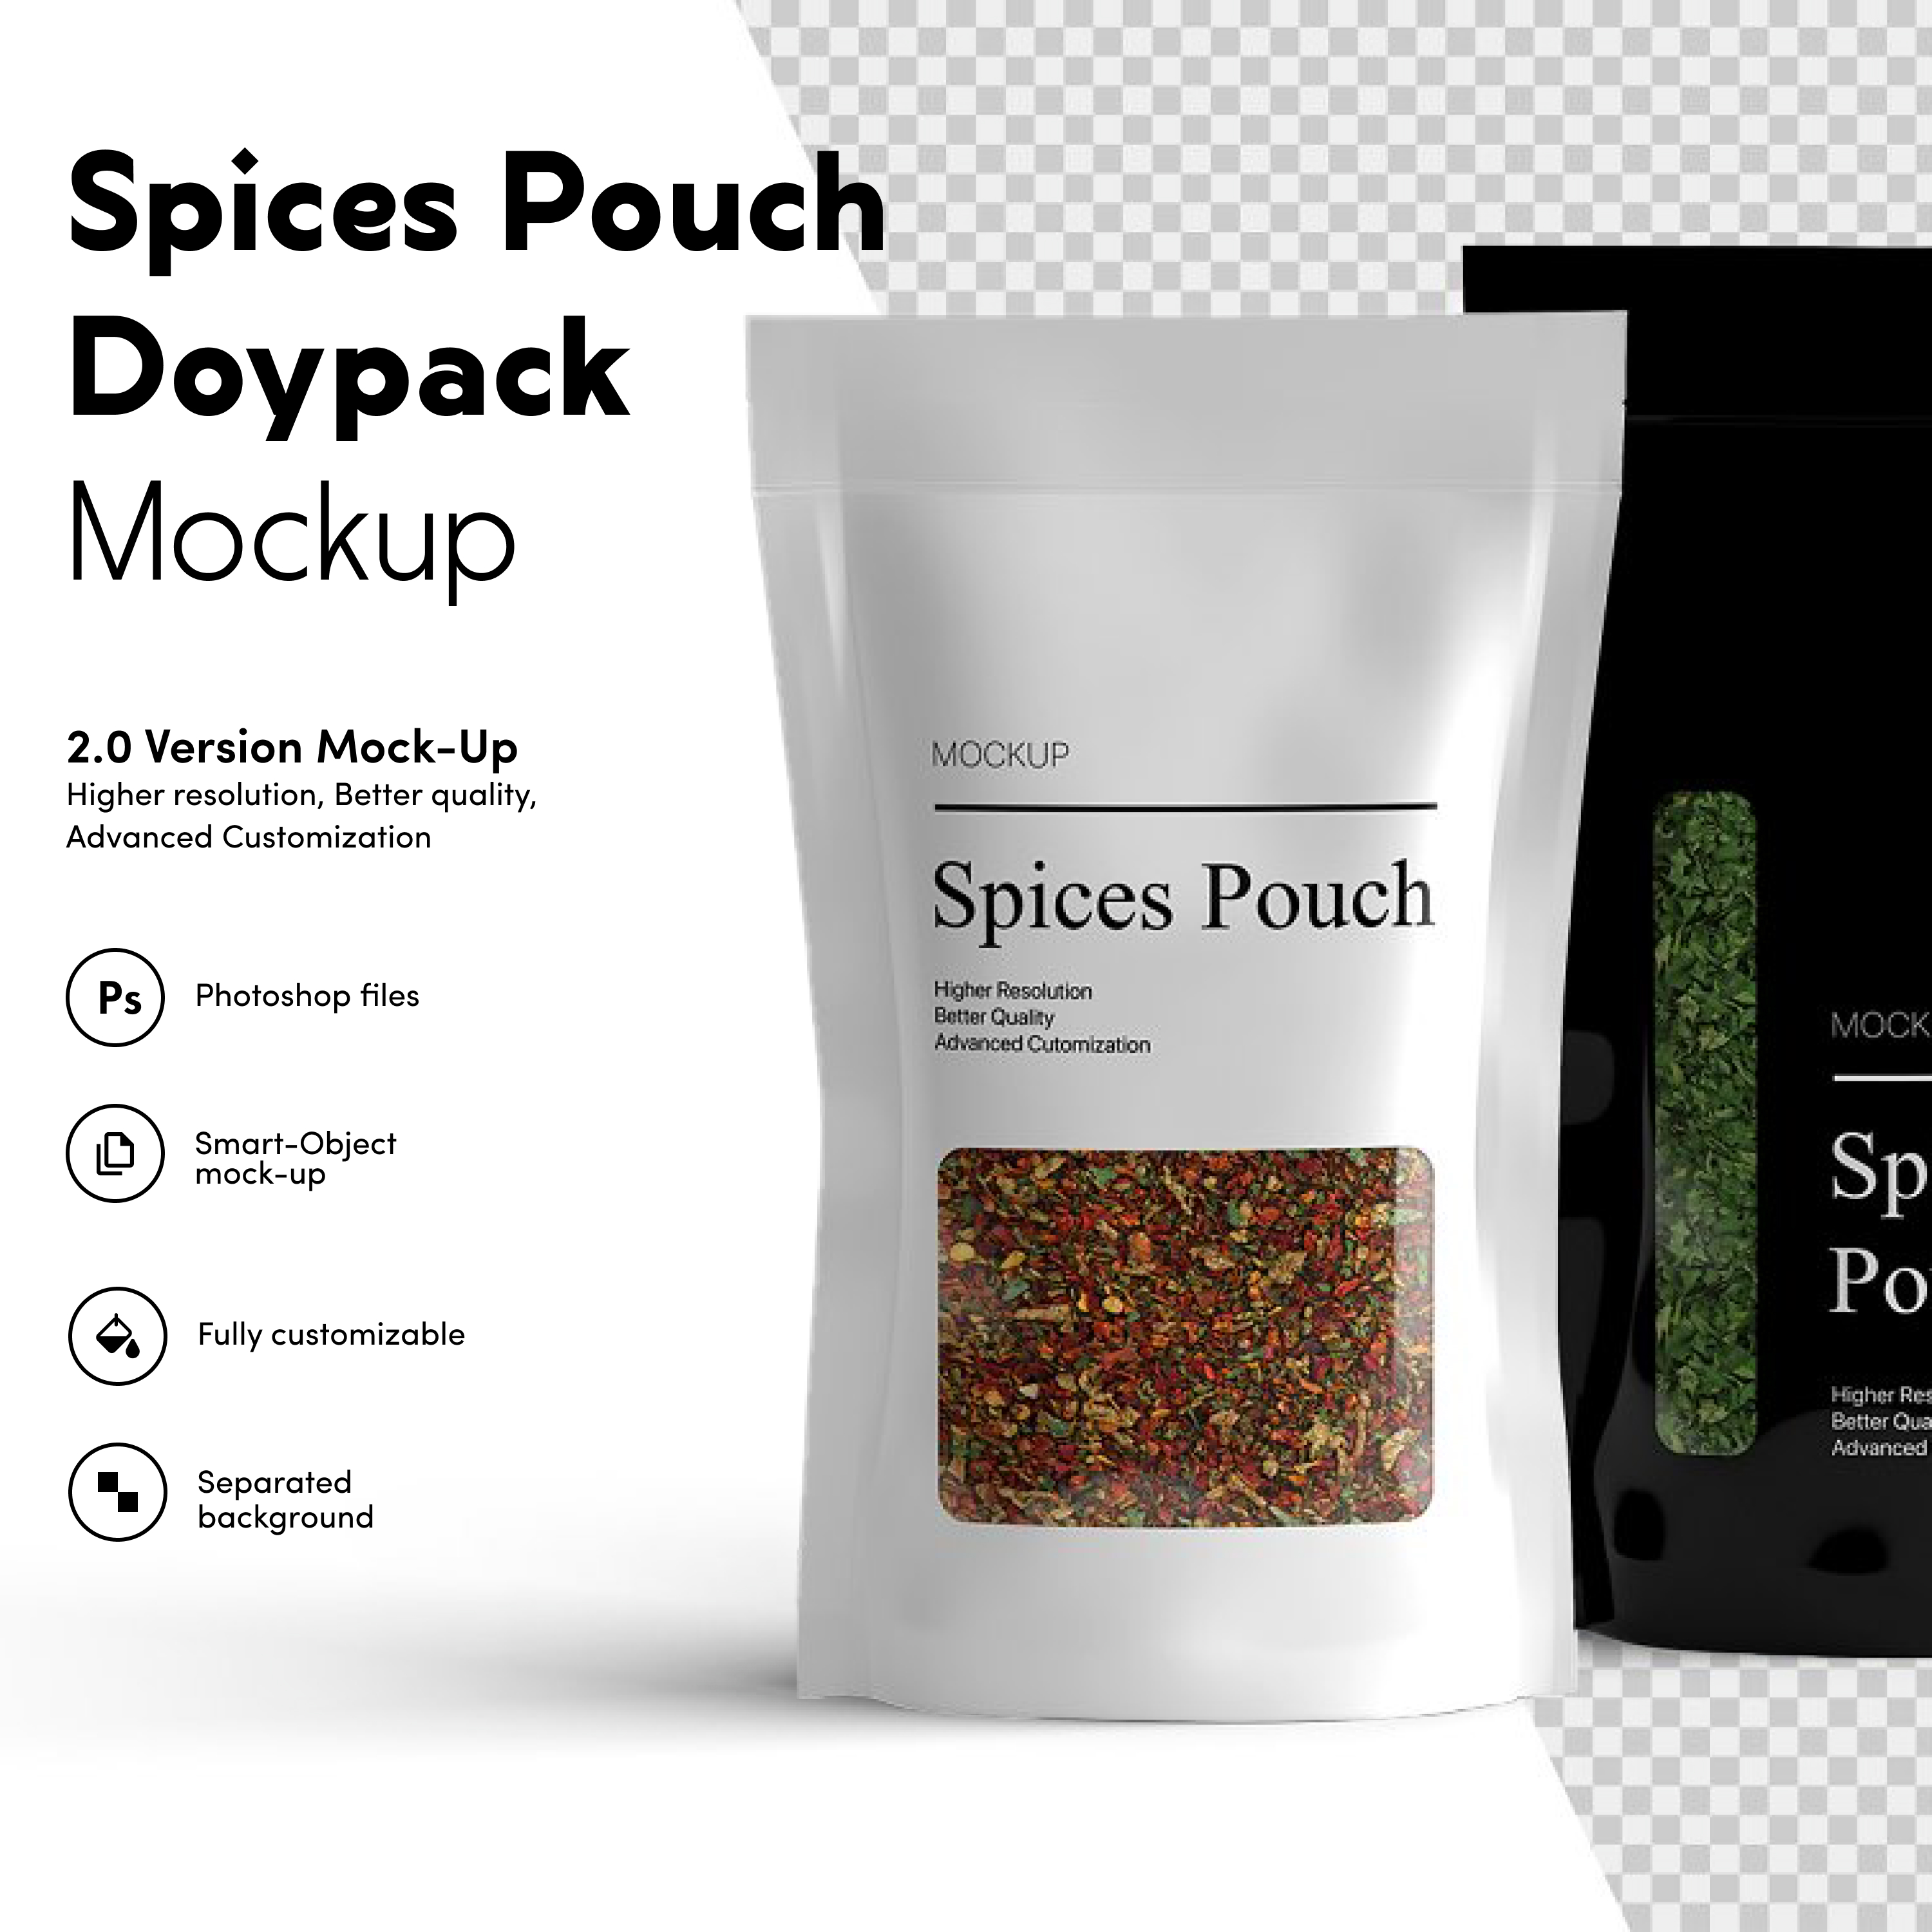 Spices pouch doypack mockup preview.